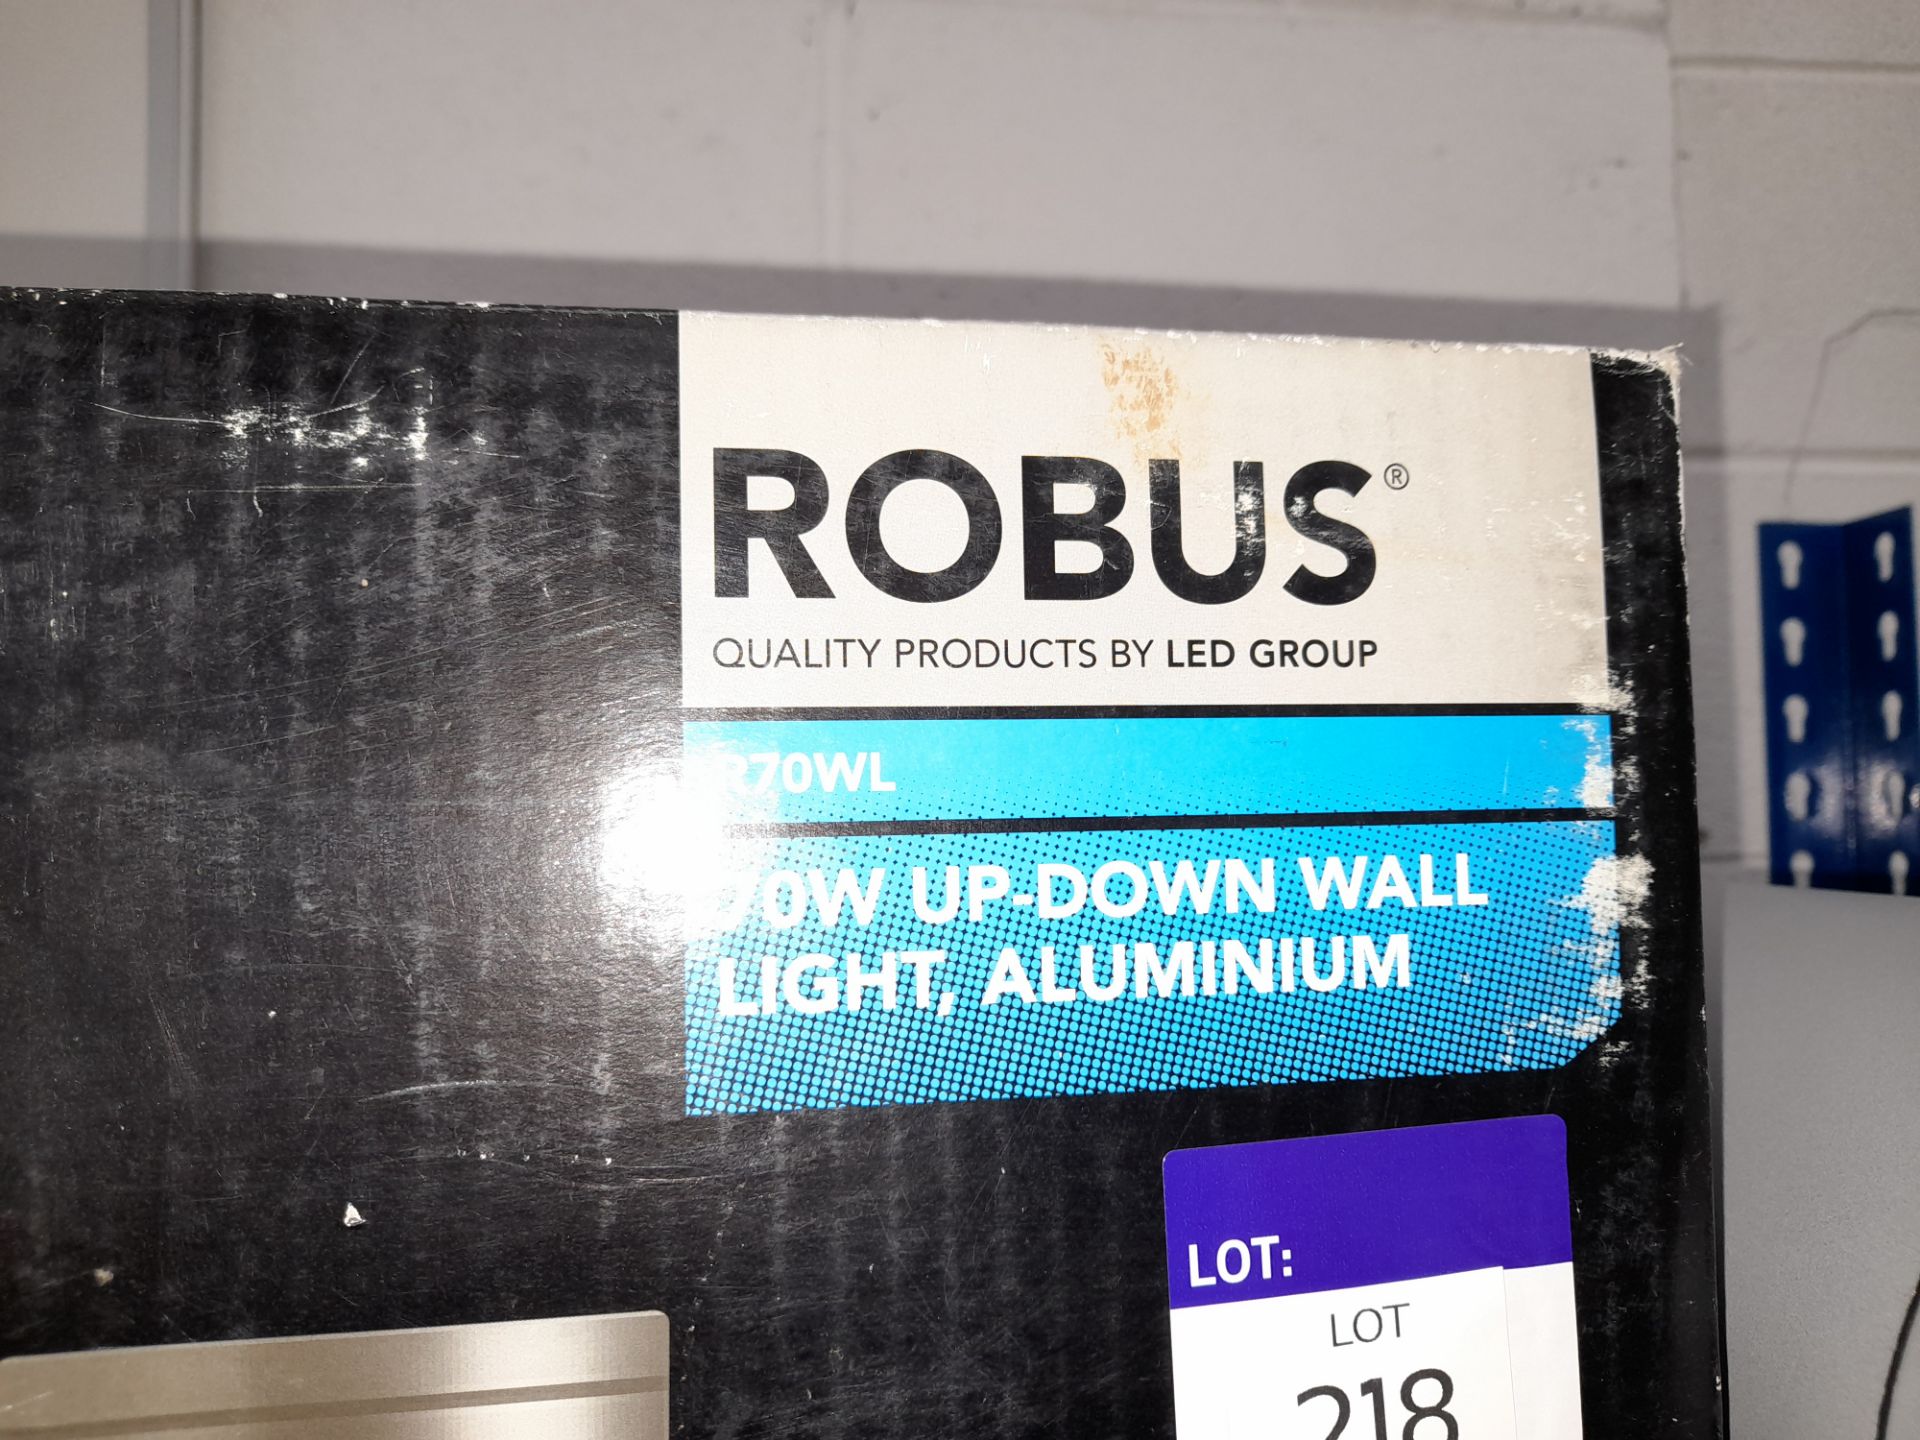 Robus R70WL 70W up-down wall light - Image 2 of 4